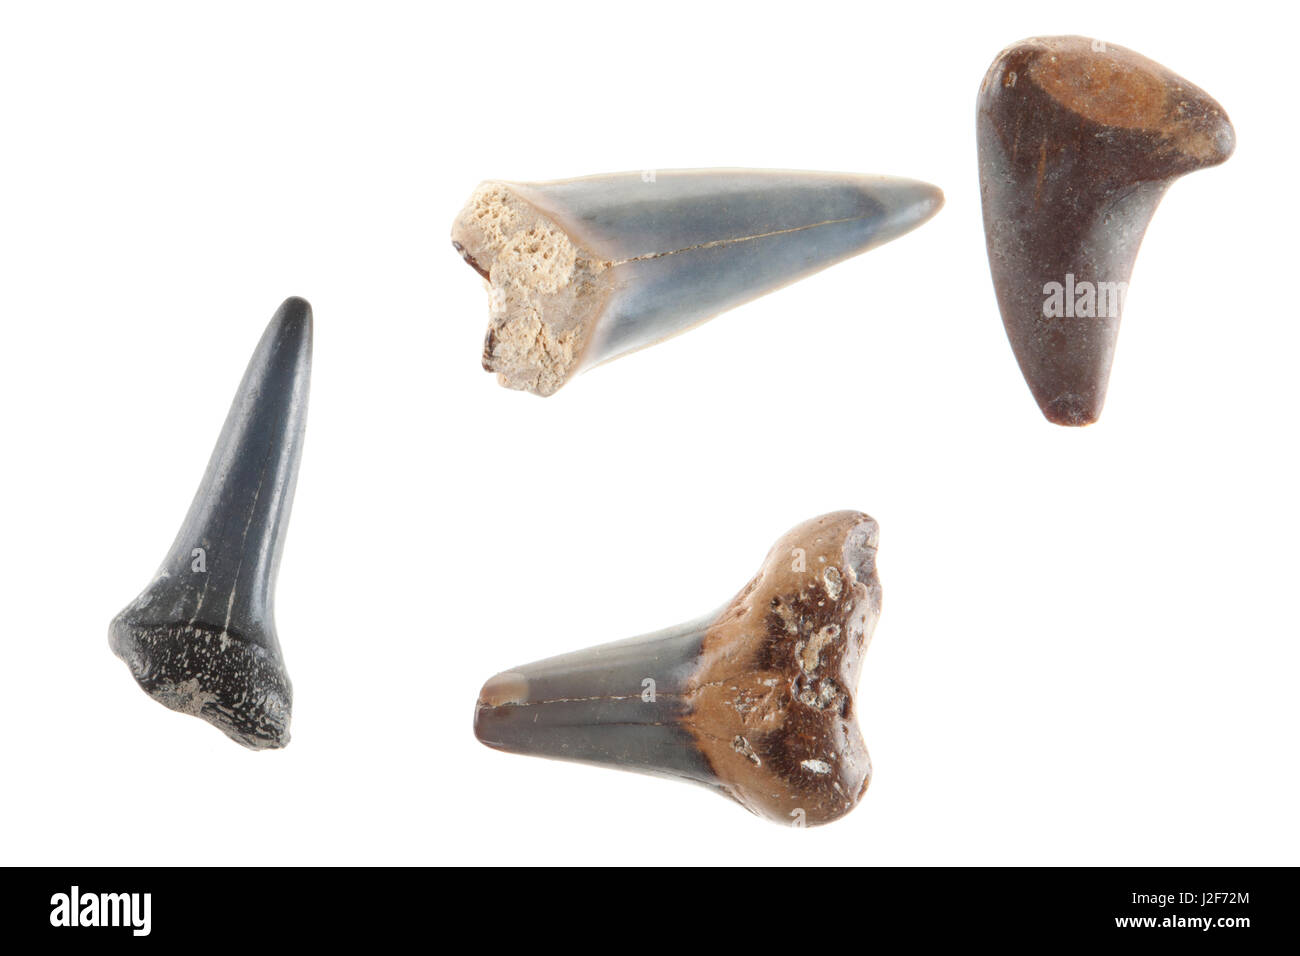 Fossil shark teeth against a white background Stock Photo